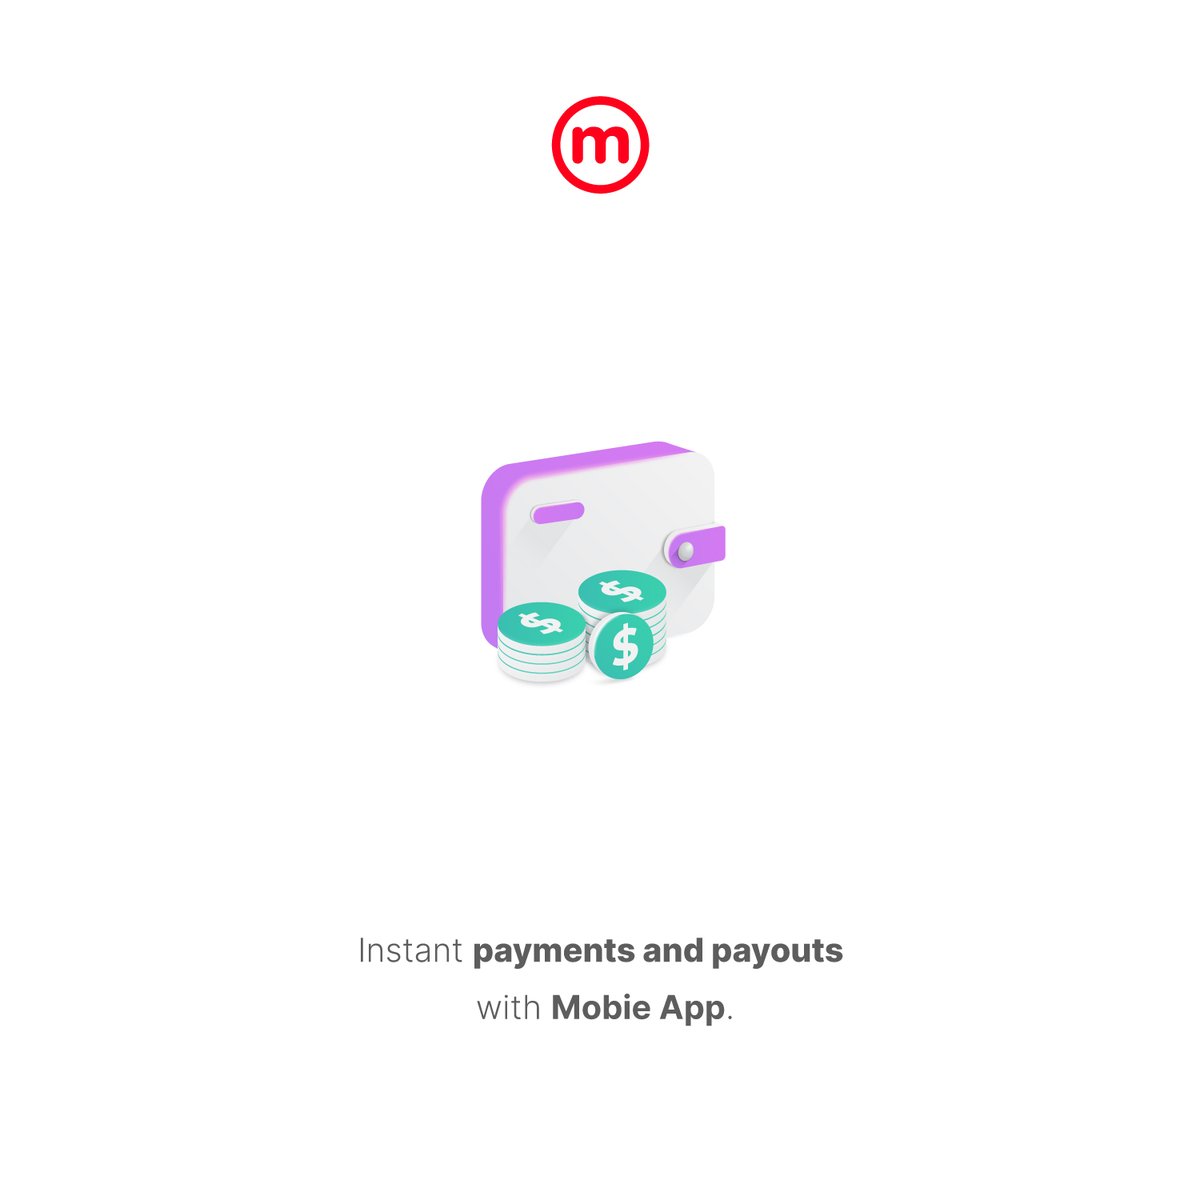 Mobie caters to your payment needs with instant transactions and payouts in multiple currencies.
#mobieapp #mobie #digitalwallet #digitalpayment #digitalpaymentsystem #multiplepayment #paymentsolution #mobilewallet #mobilepayment